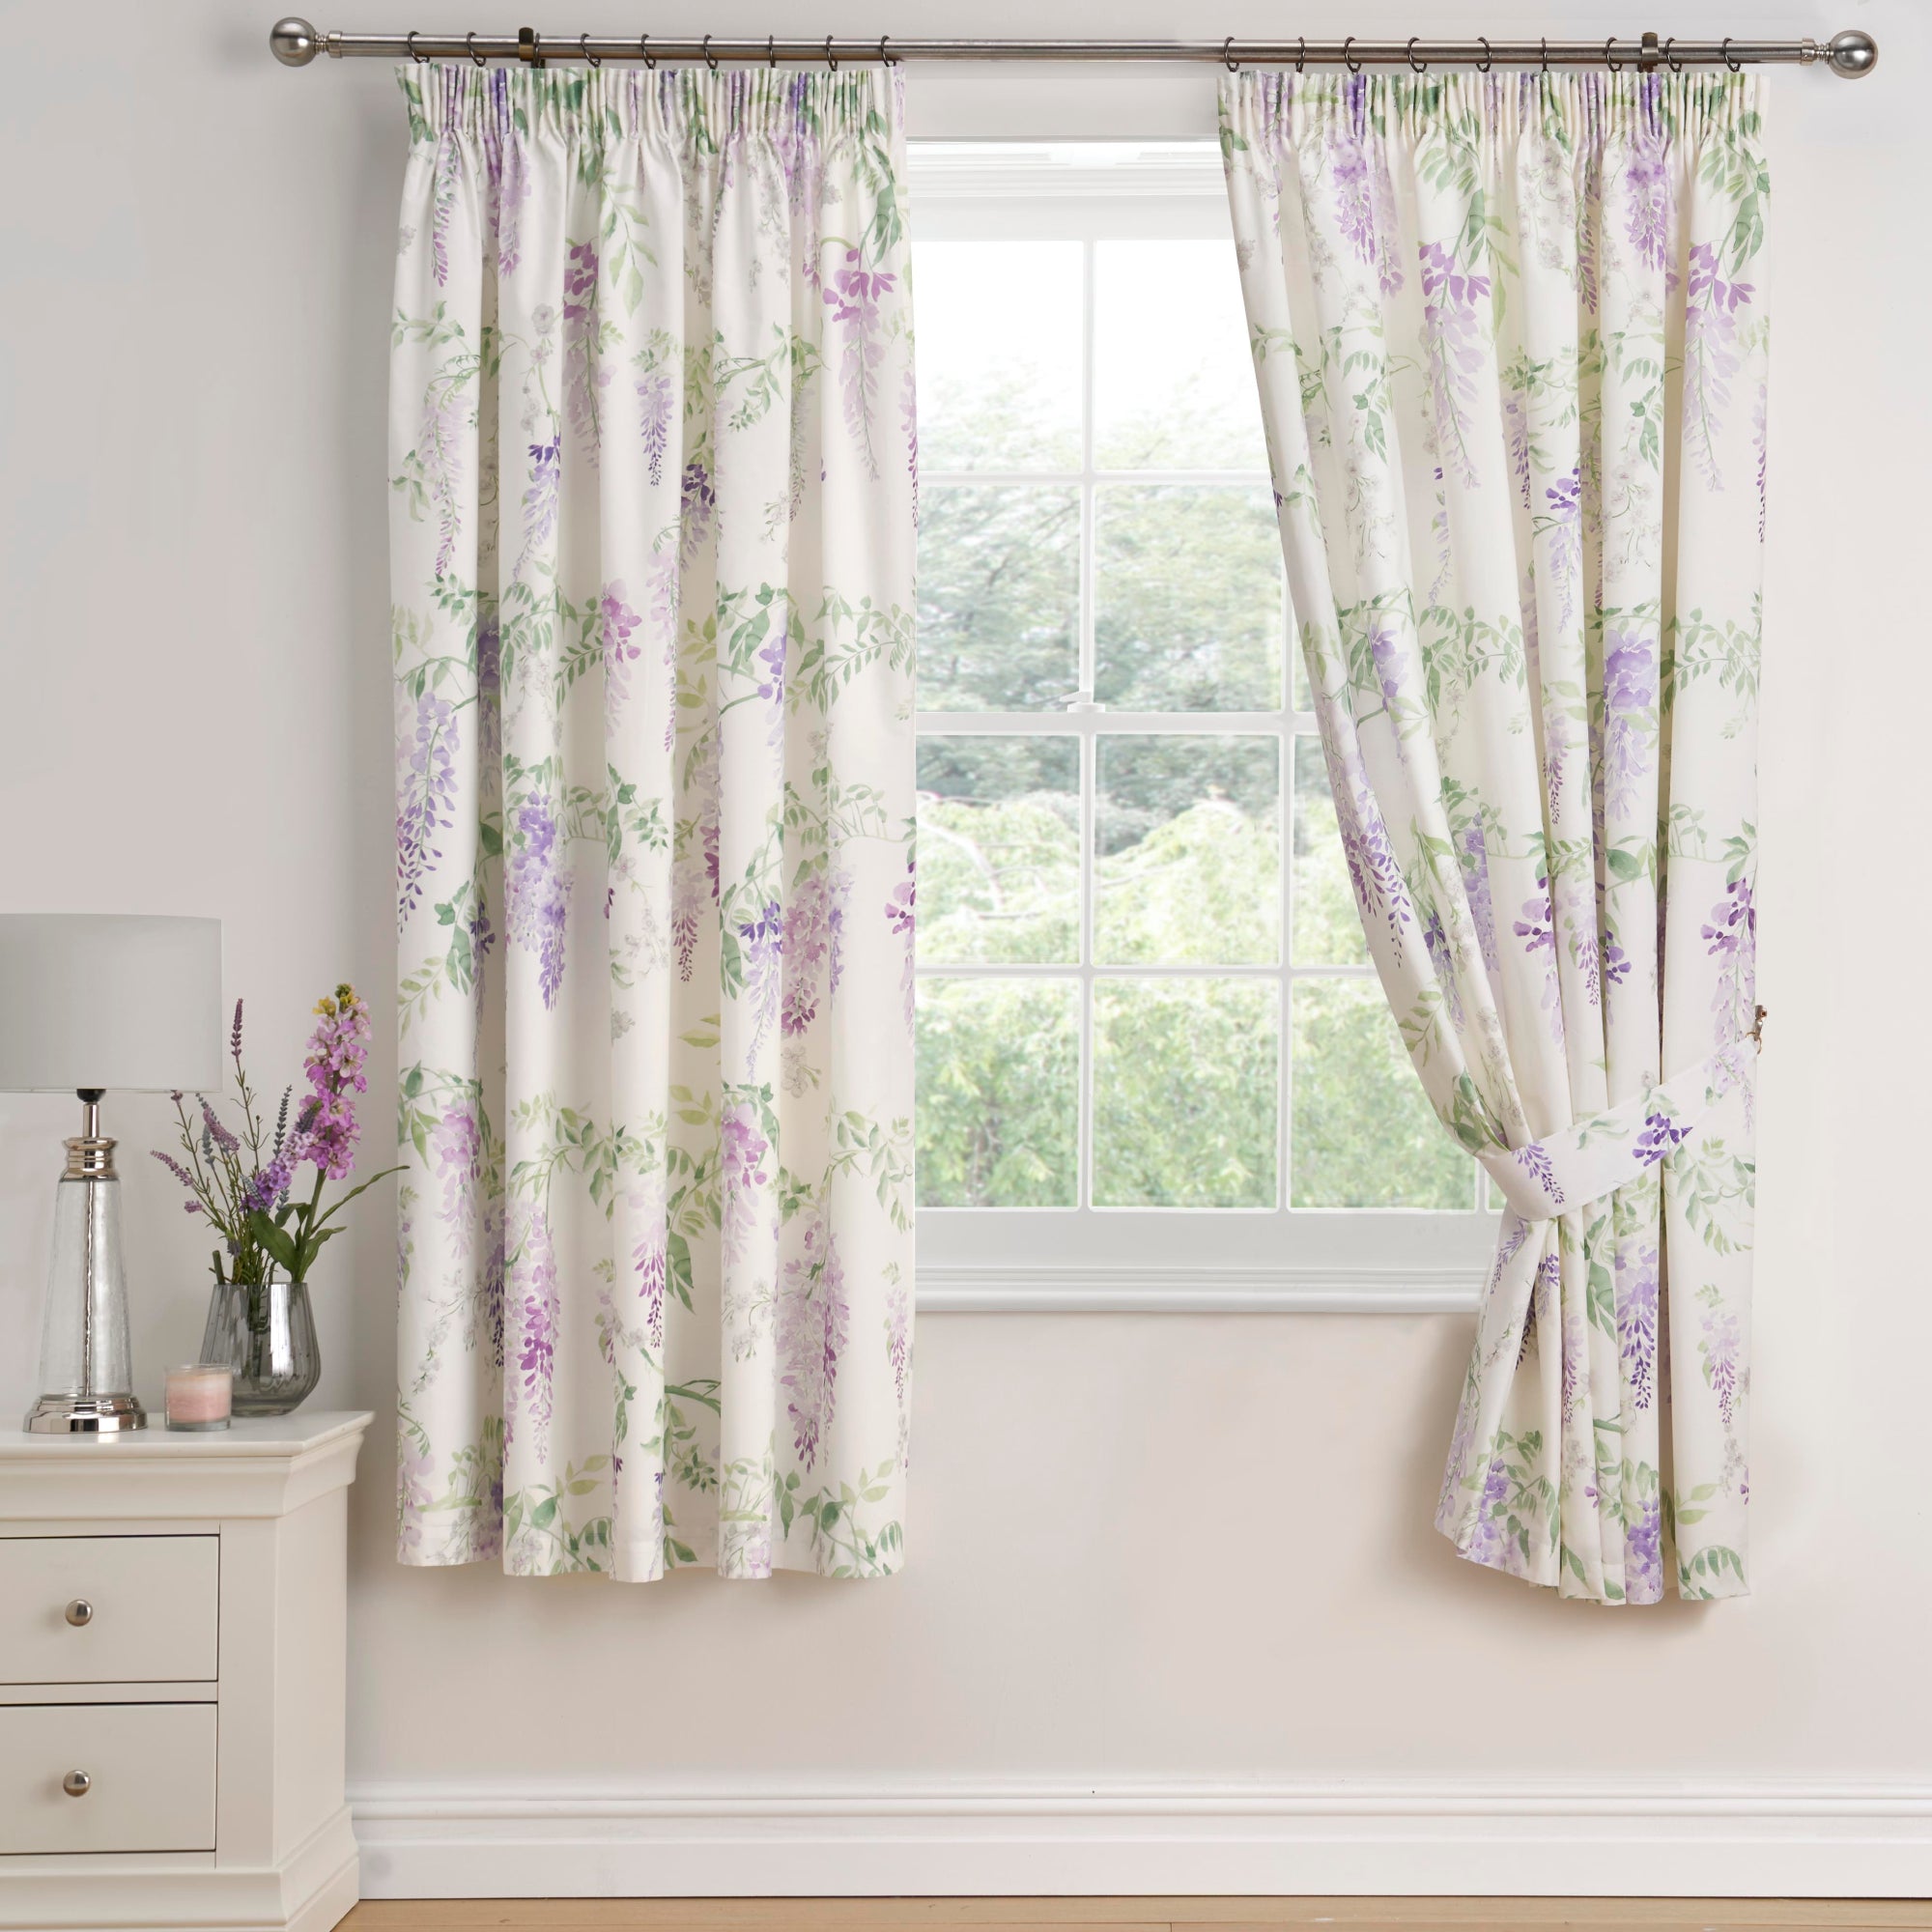 Pair of Pencil Pleat Curtains With Tie-Backs Wisteria by Dreams & Drapes Design in Lilac